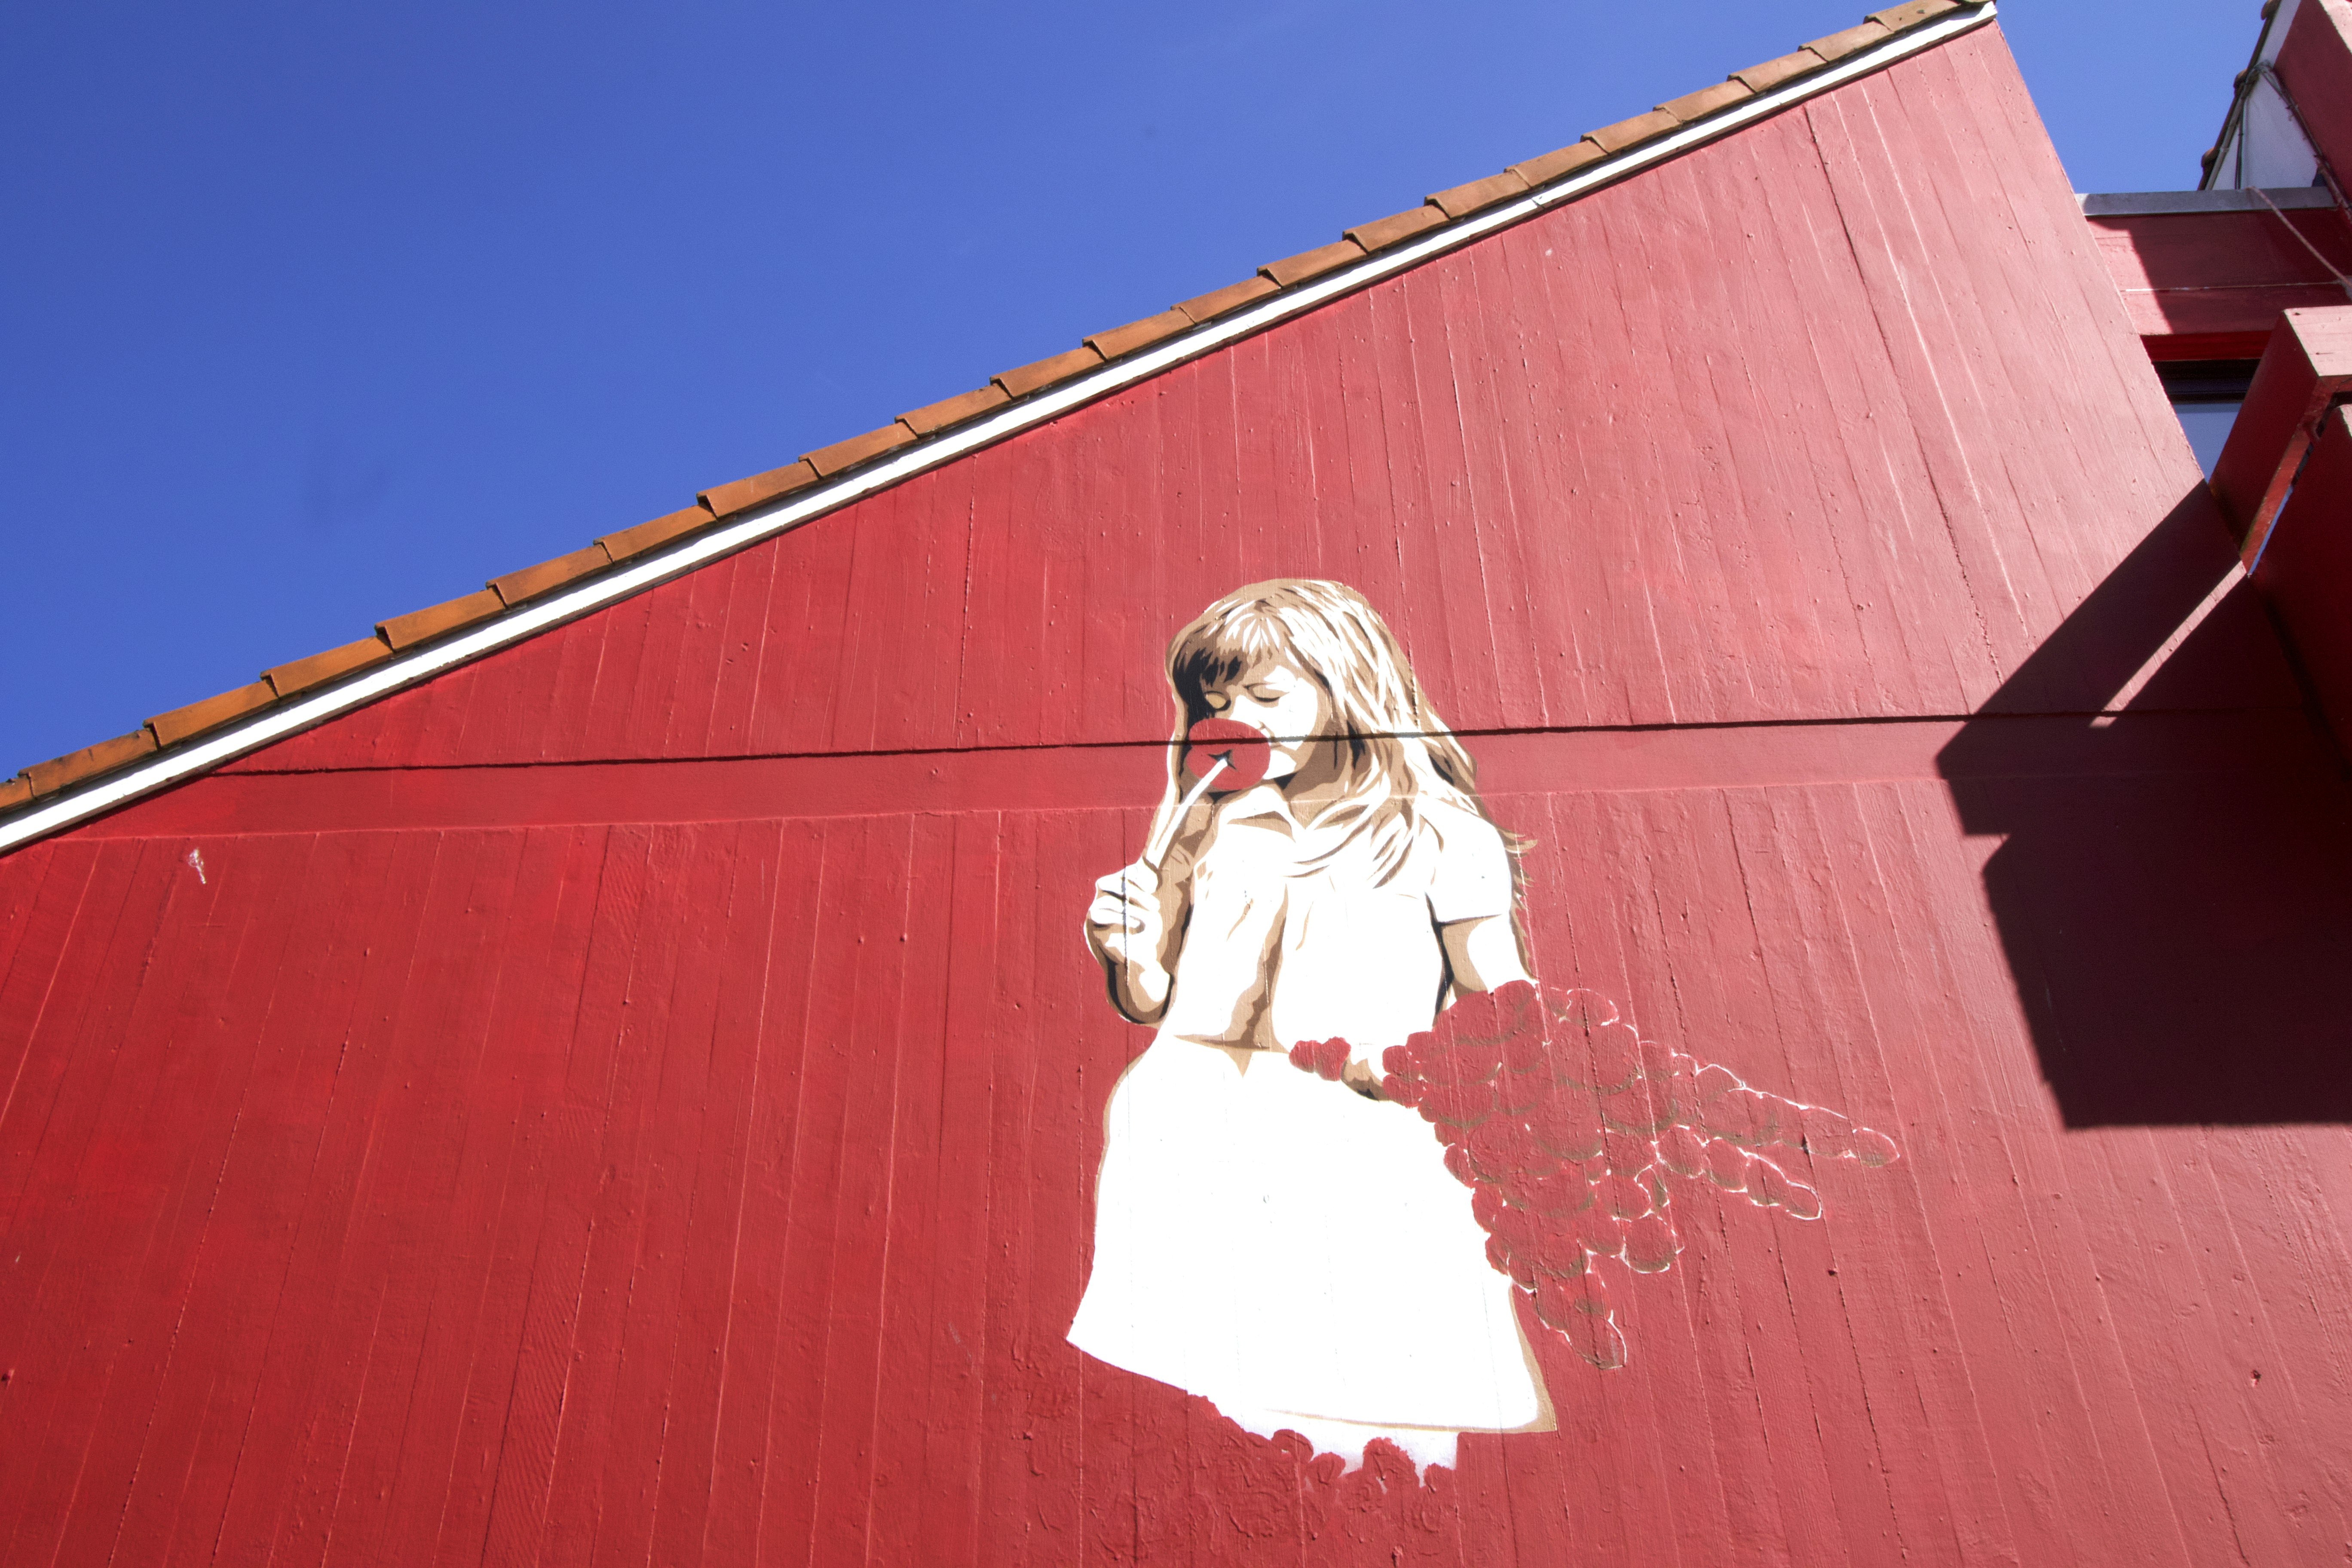 Stavanger street art mural of a young girl in a white dress painted on a red wall